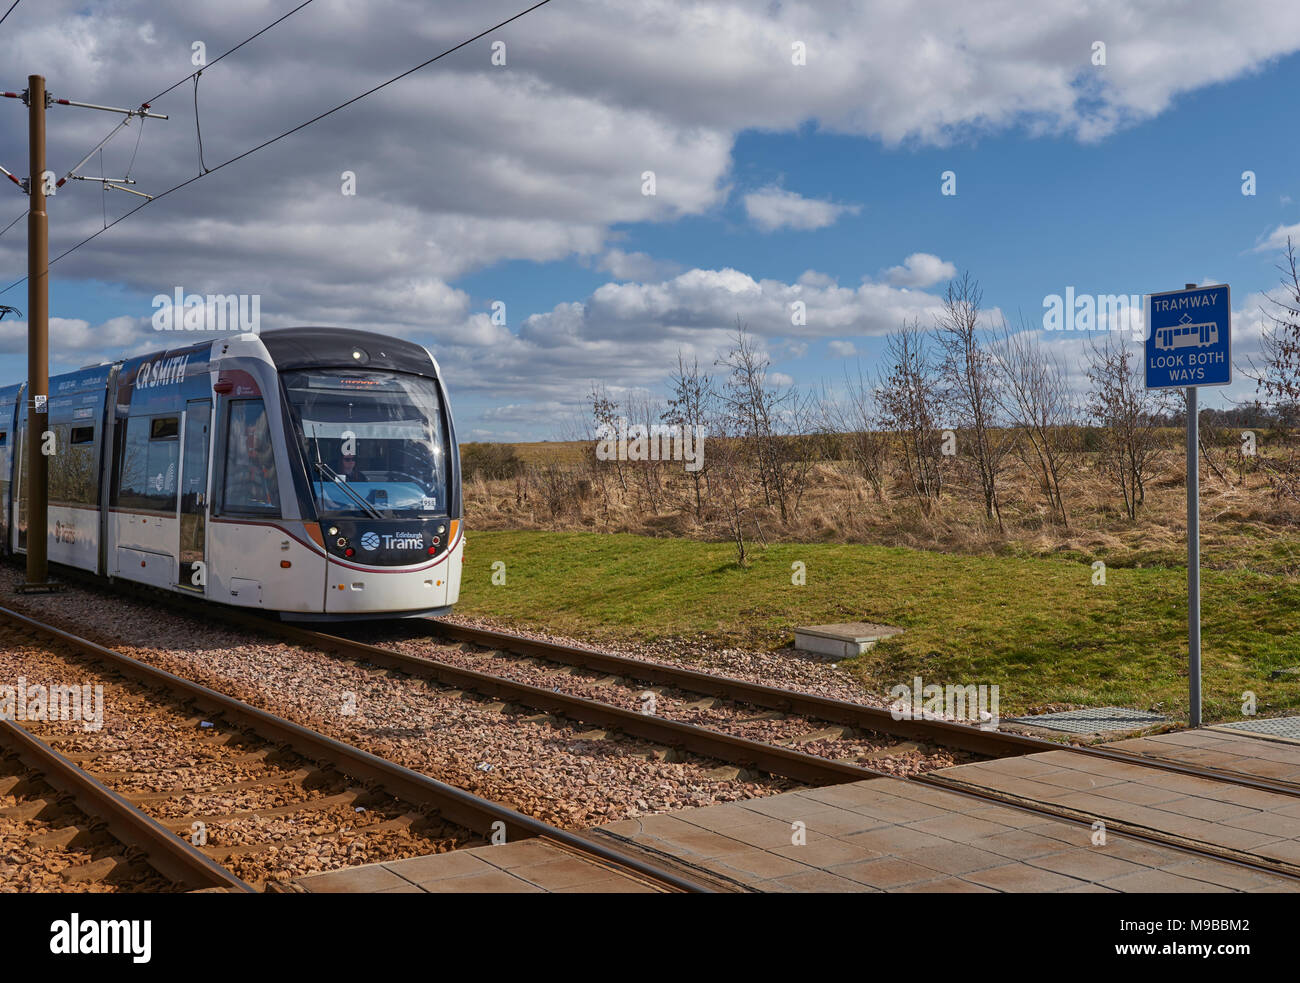 An Edinburgh Tram approaching a Station on the new Edinburgh Tram system, which runs from the City Centre to Edinburgh Airport. Stock Photo